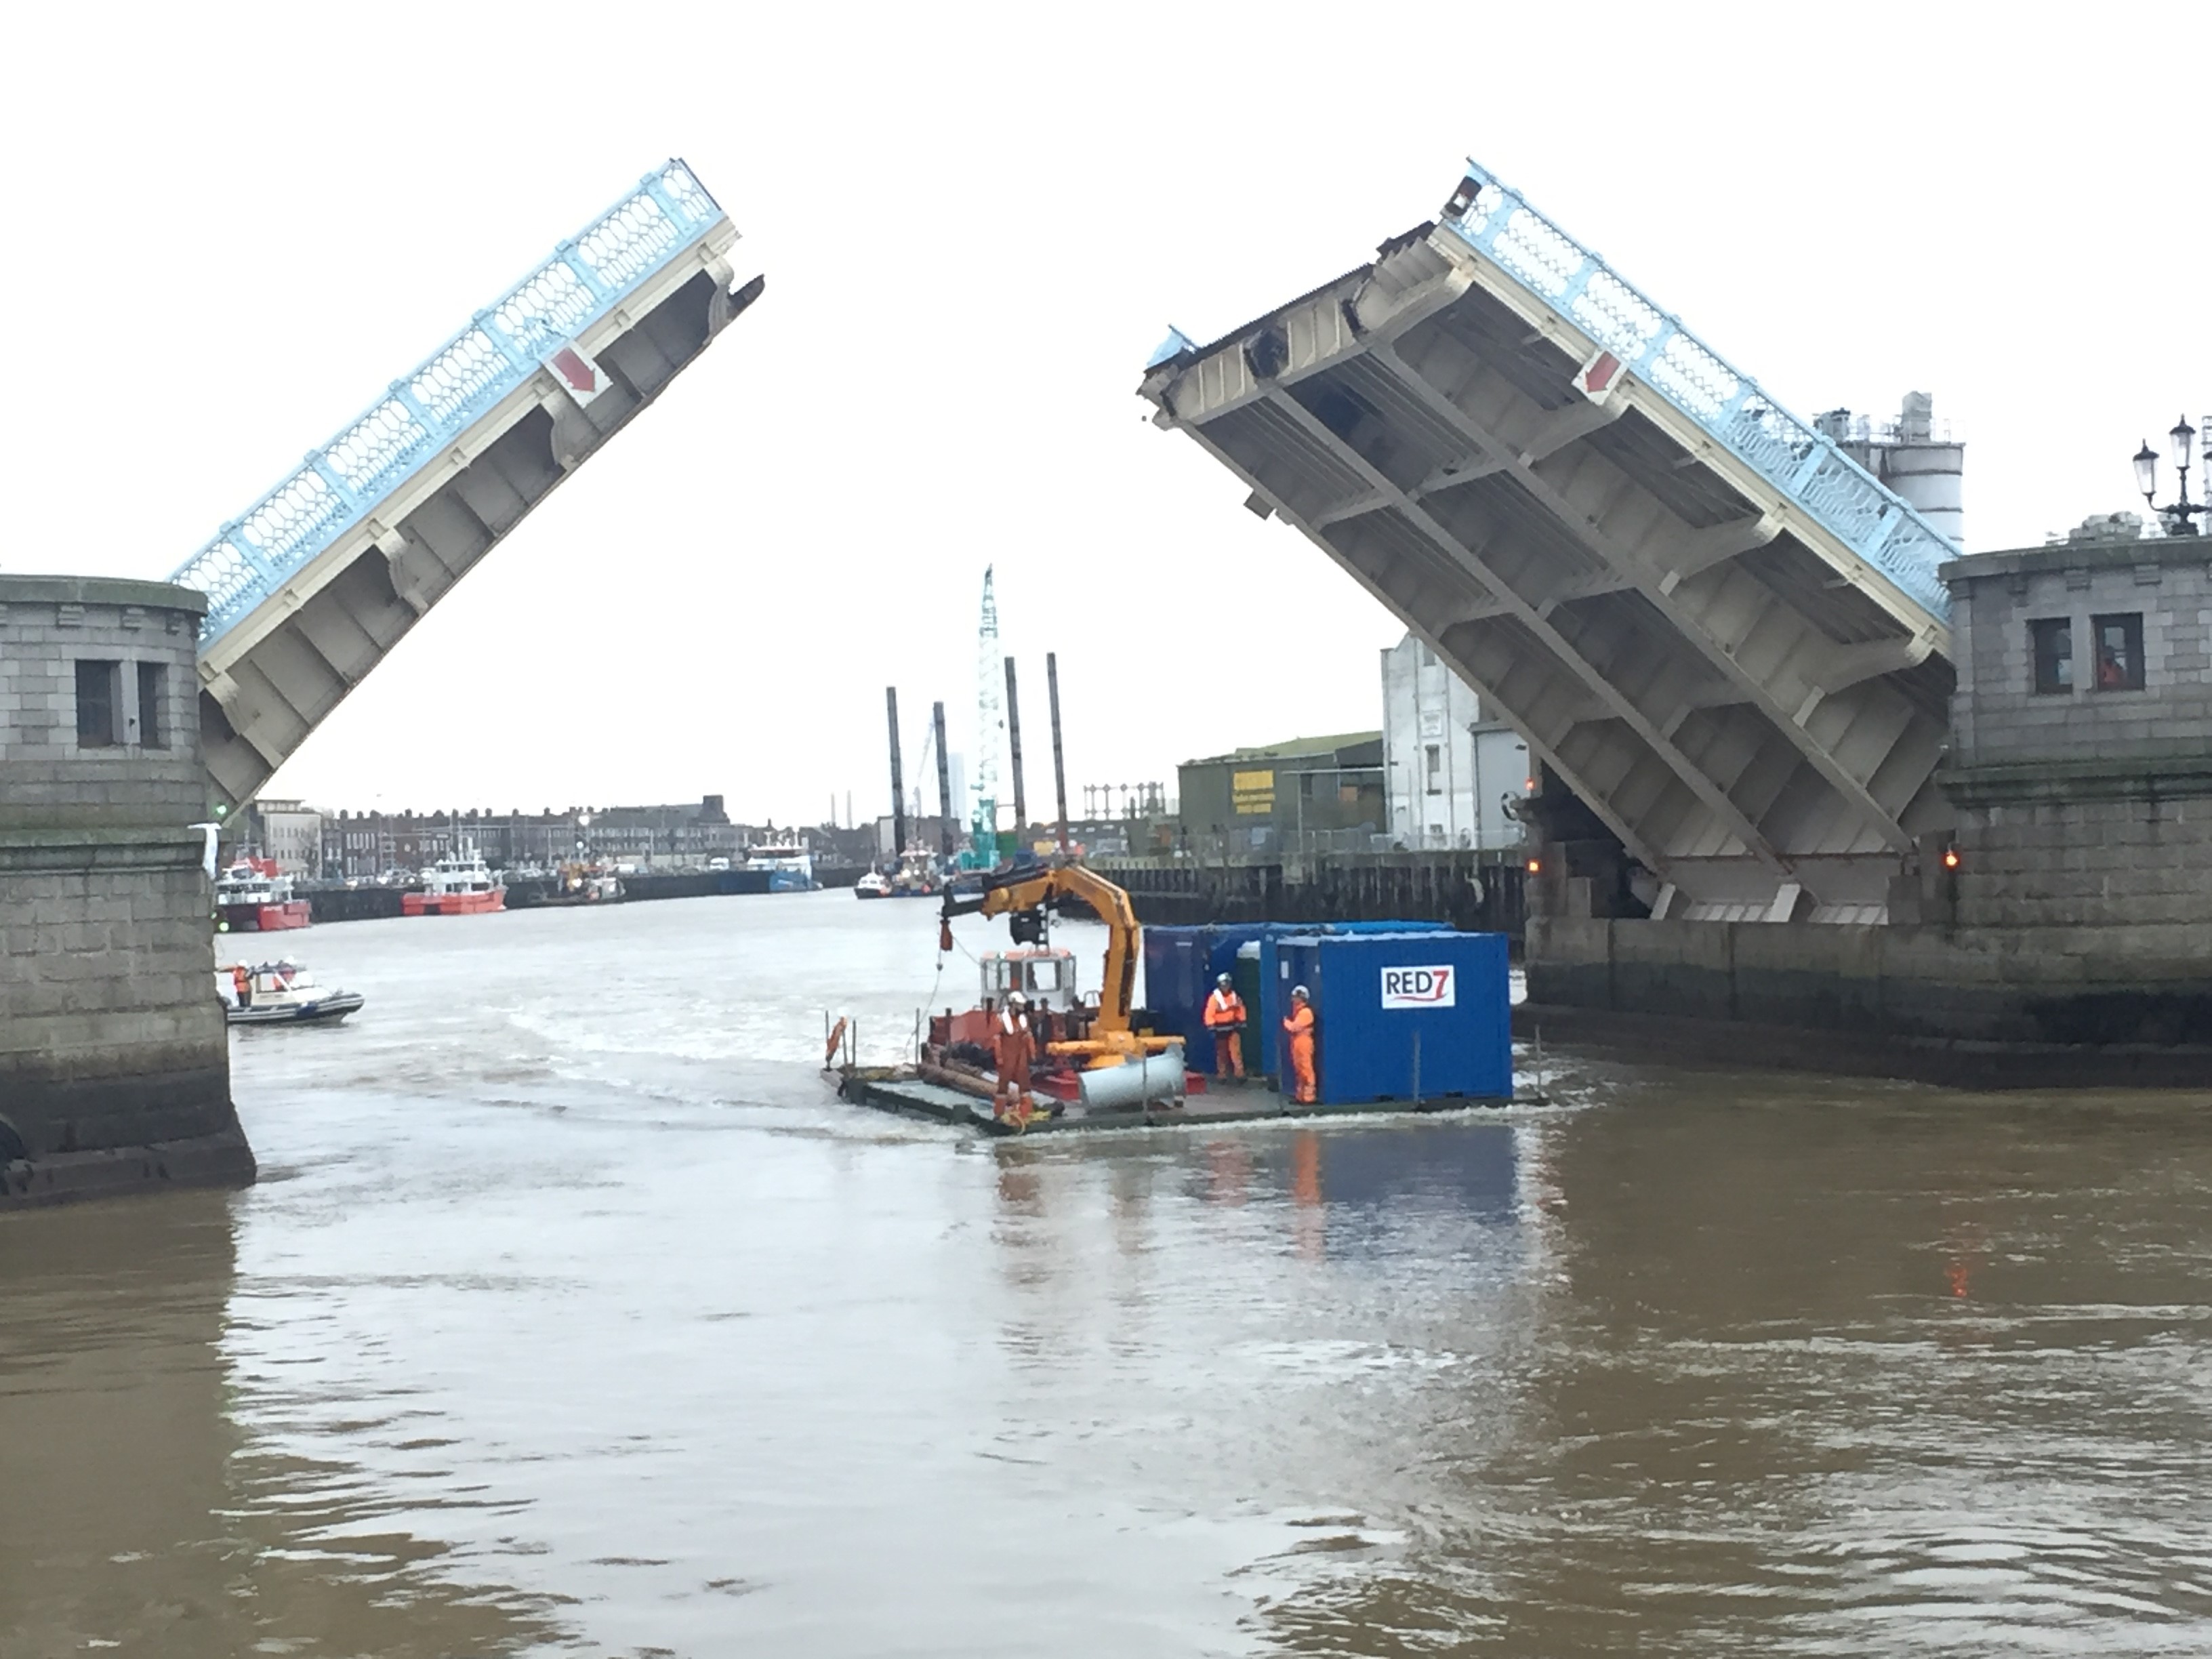 Red 7's Pontoon being moved from The River Yare to The River Bure to being work.